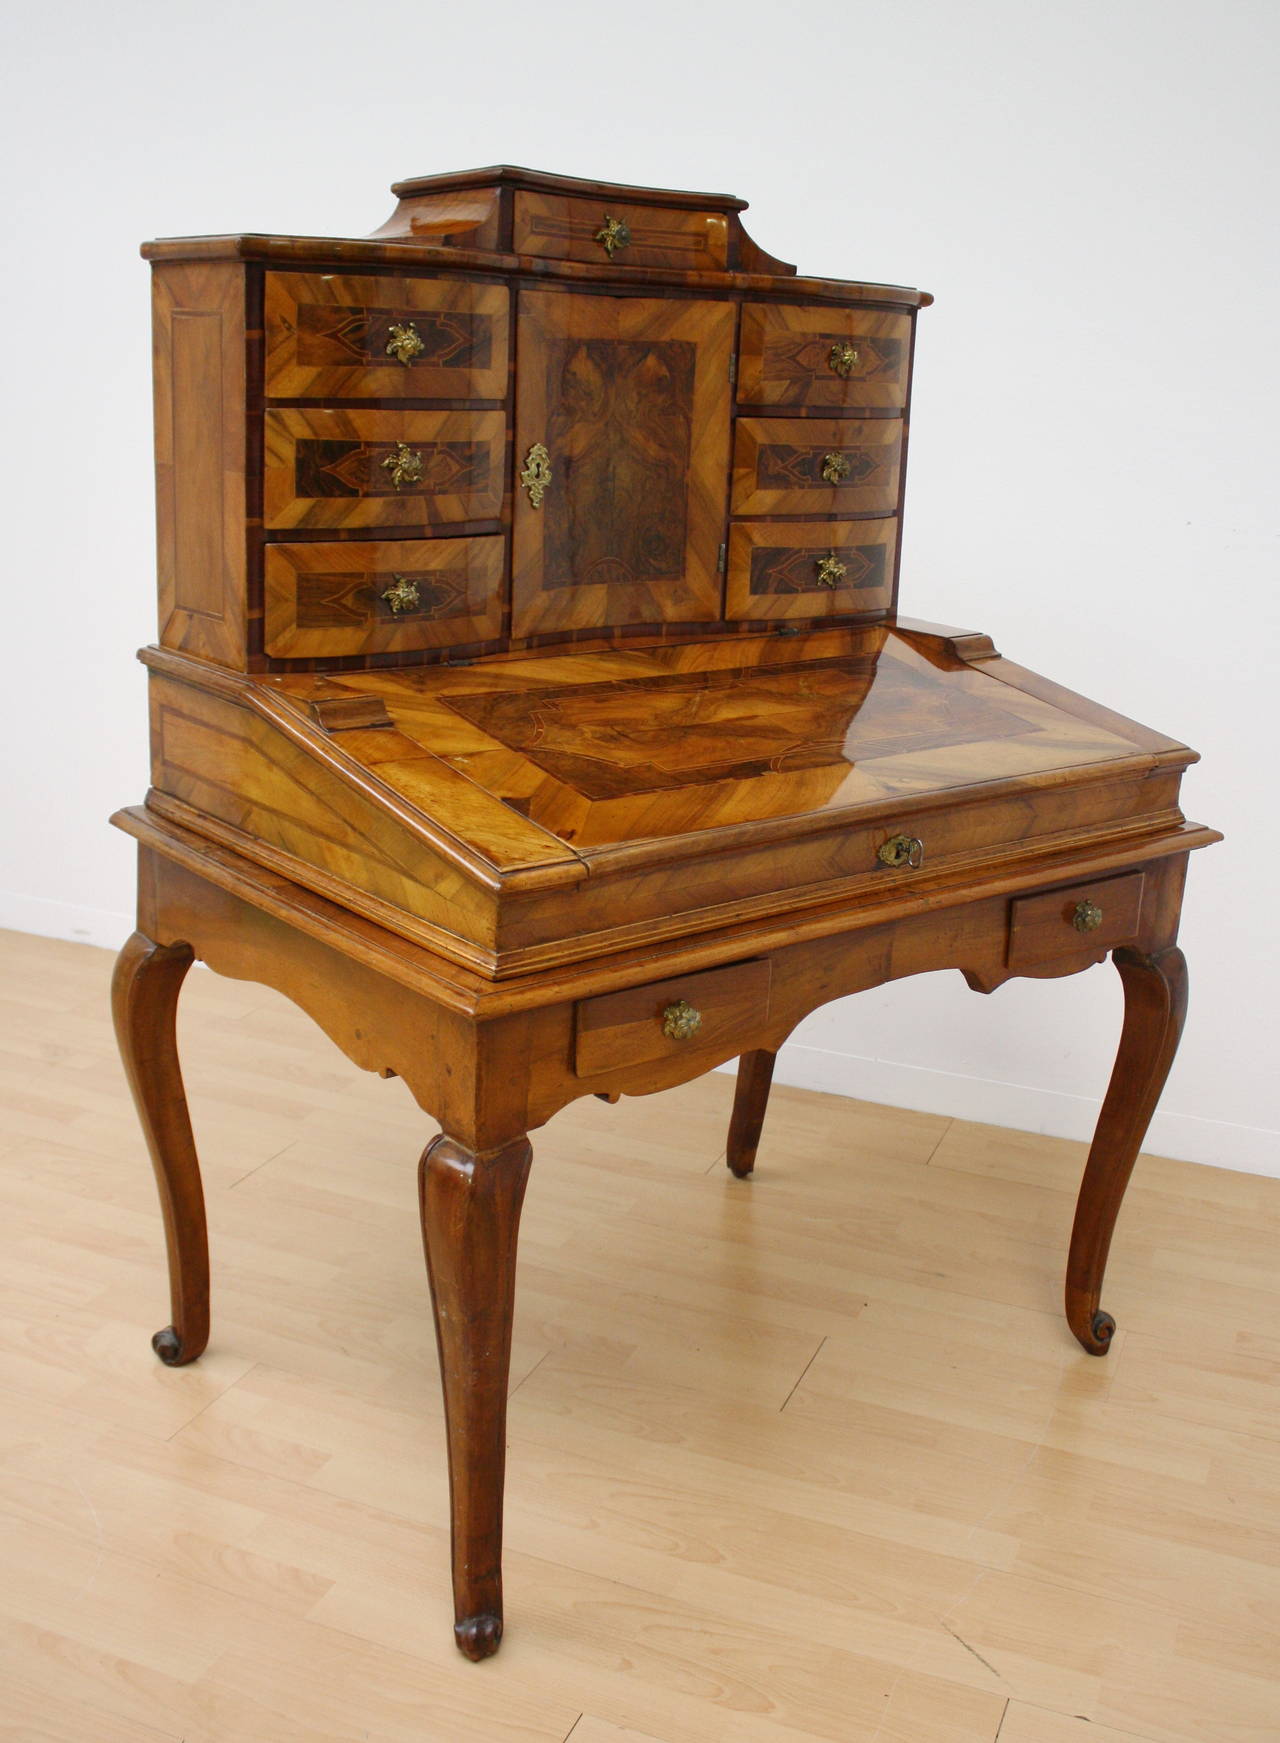 Charming small desk on high legs with hinging cover and tabernacle cabinet.
Typical Austrian Maria Theresa Baroque.